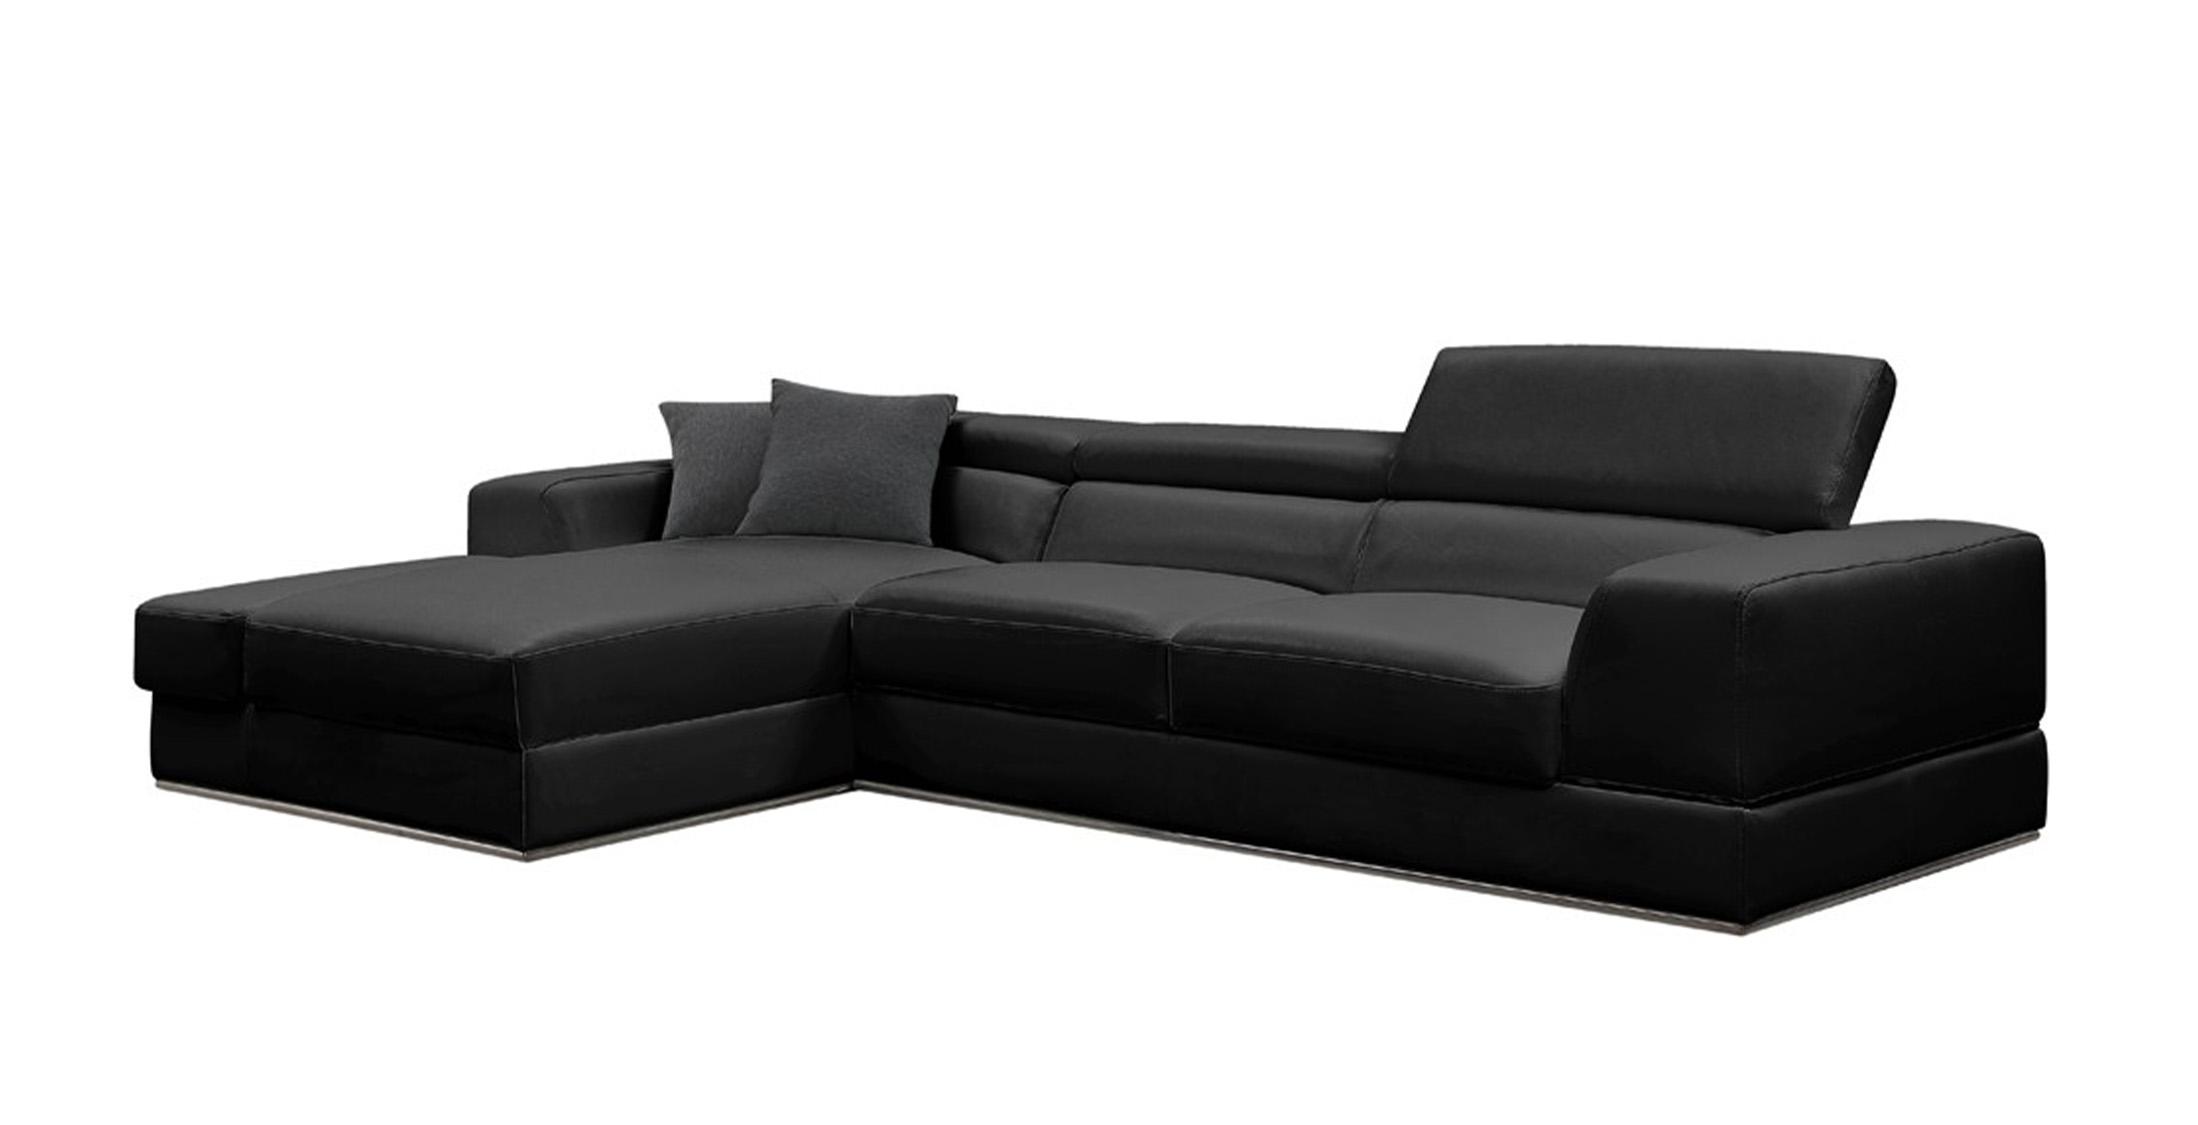 Contemporary, Modern Sectional Sofa VGCA5106A-BLK VGCA5106A-BLK in Black Italian Leather